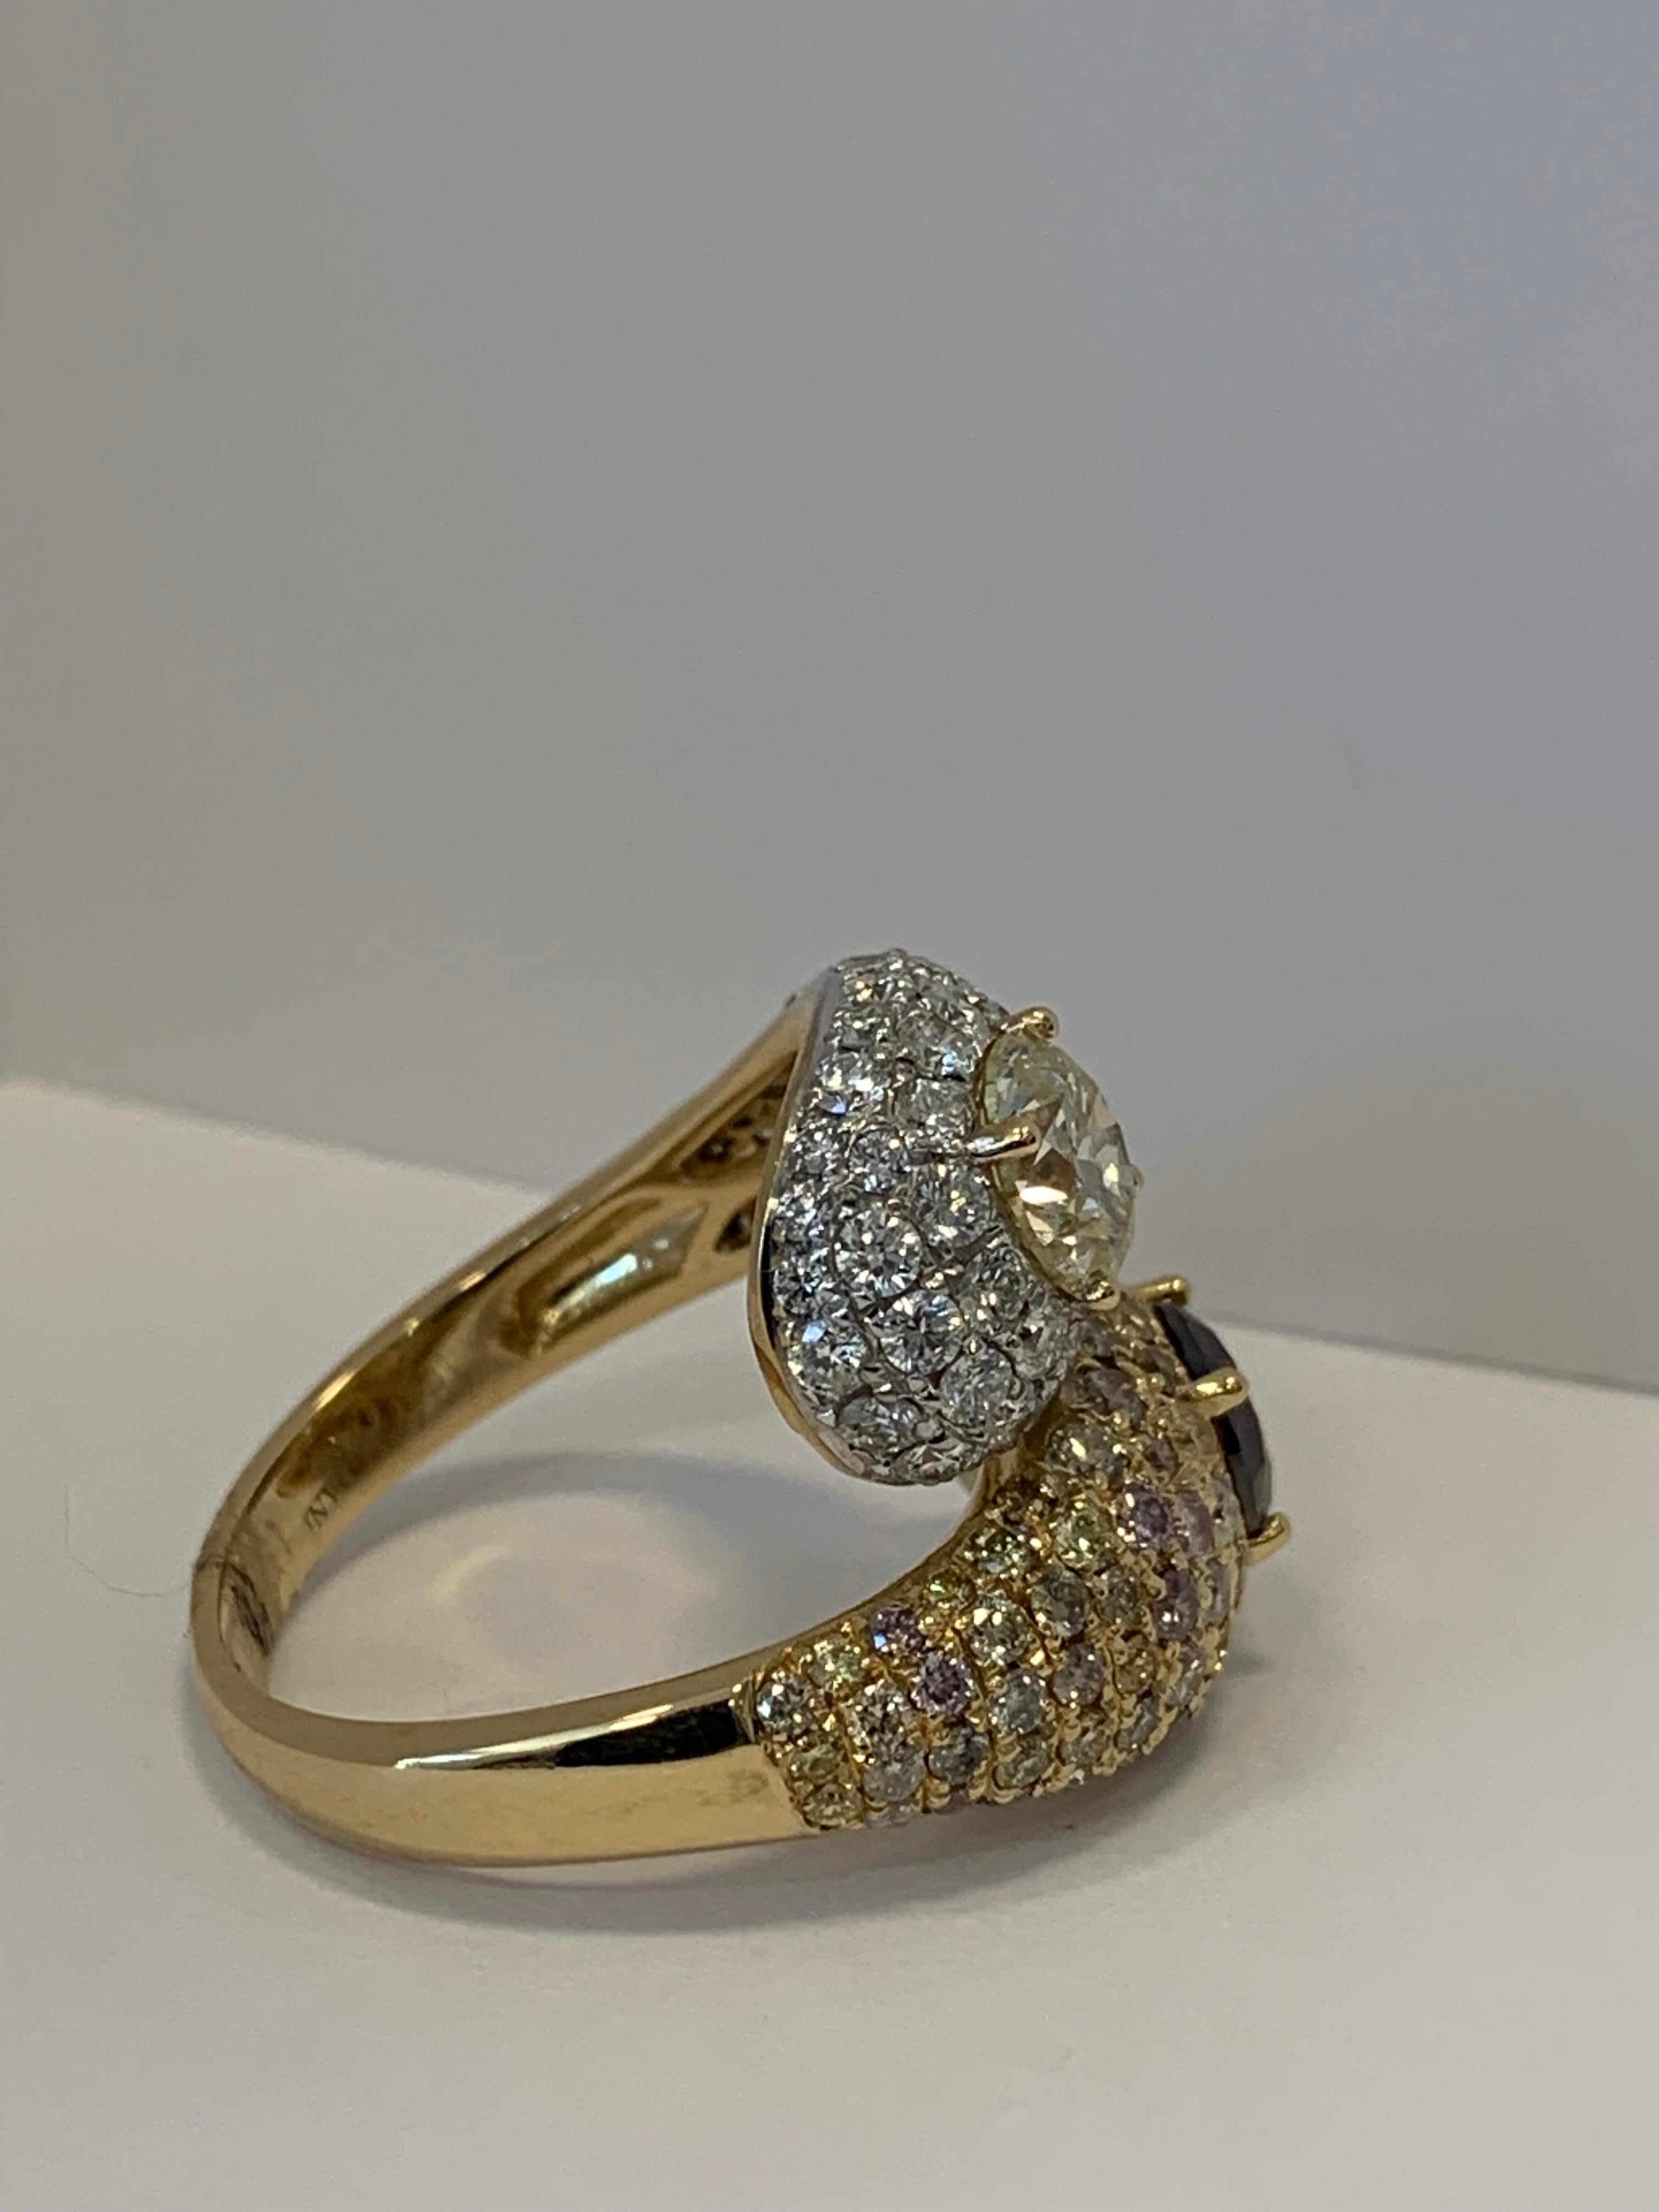 White Orange and Multicolor Diamond Ring Set in 18KYG TDW 4.65 Carat Diamond  In New Condition For Sale In Trumbull, CT